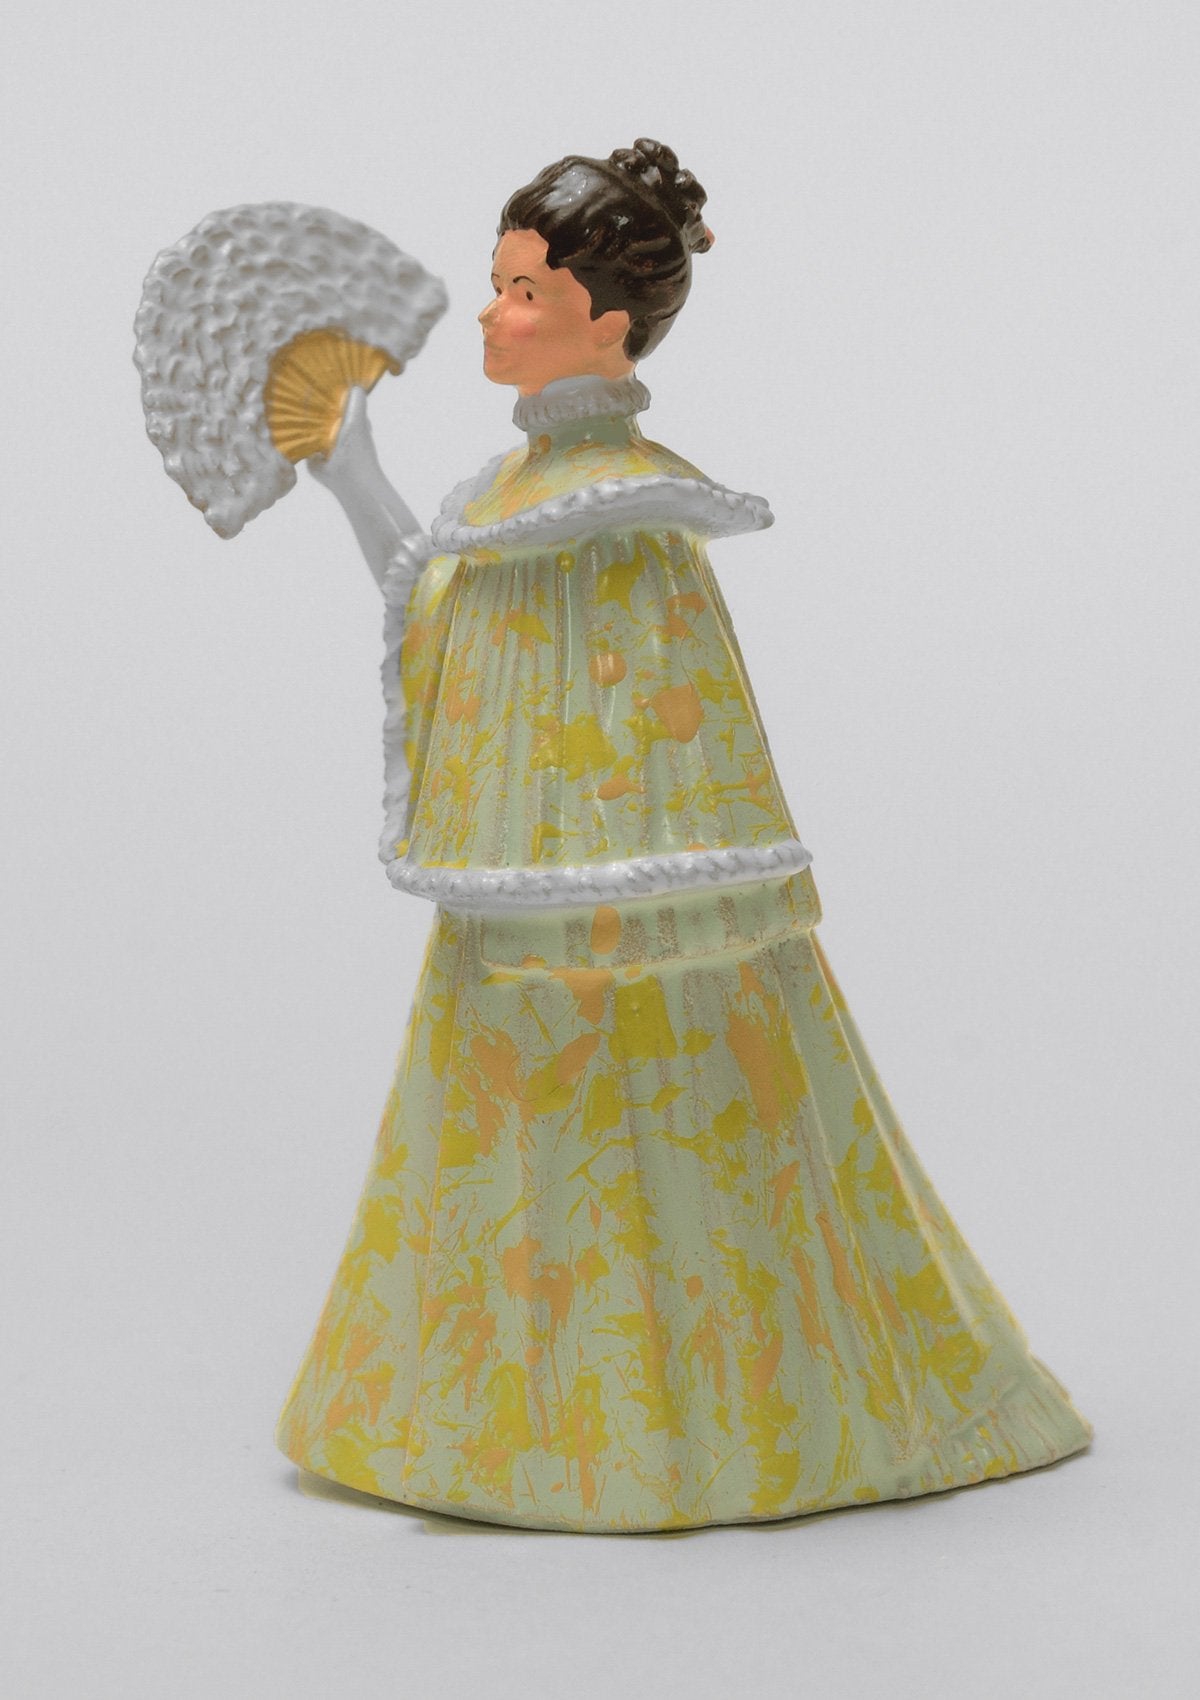 Set 45 To the Opera | Victorian Lady | Town and Around | © Imperial Productions | Sculpt by David Cowe